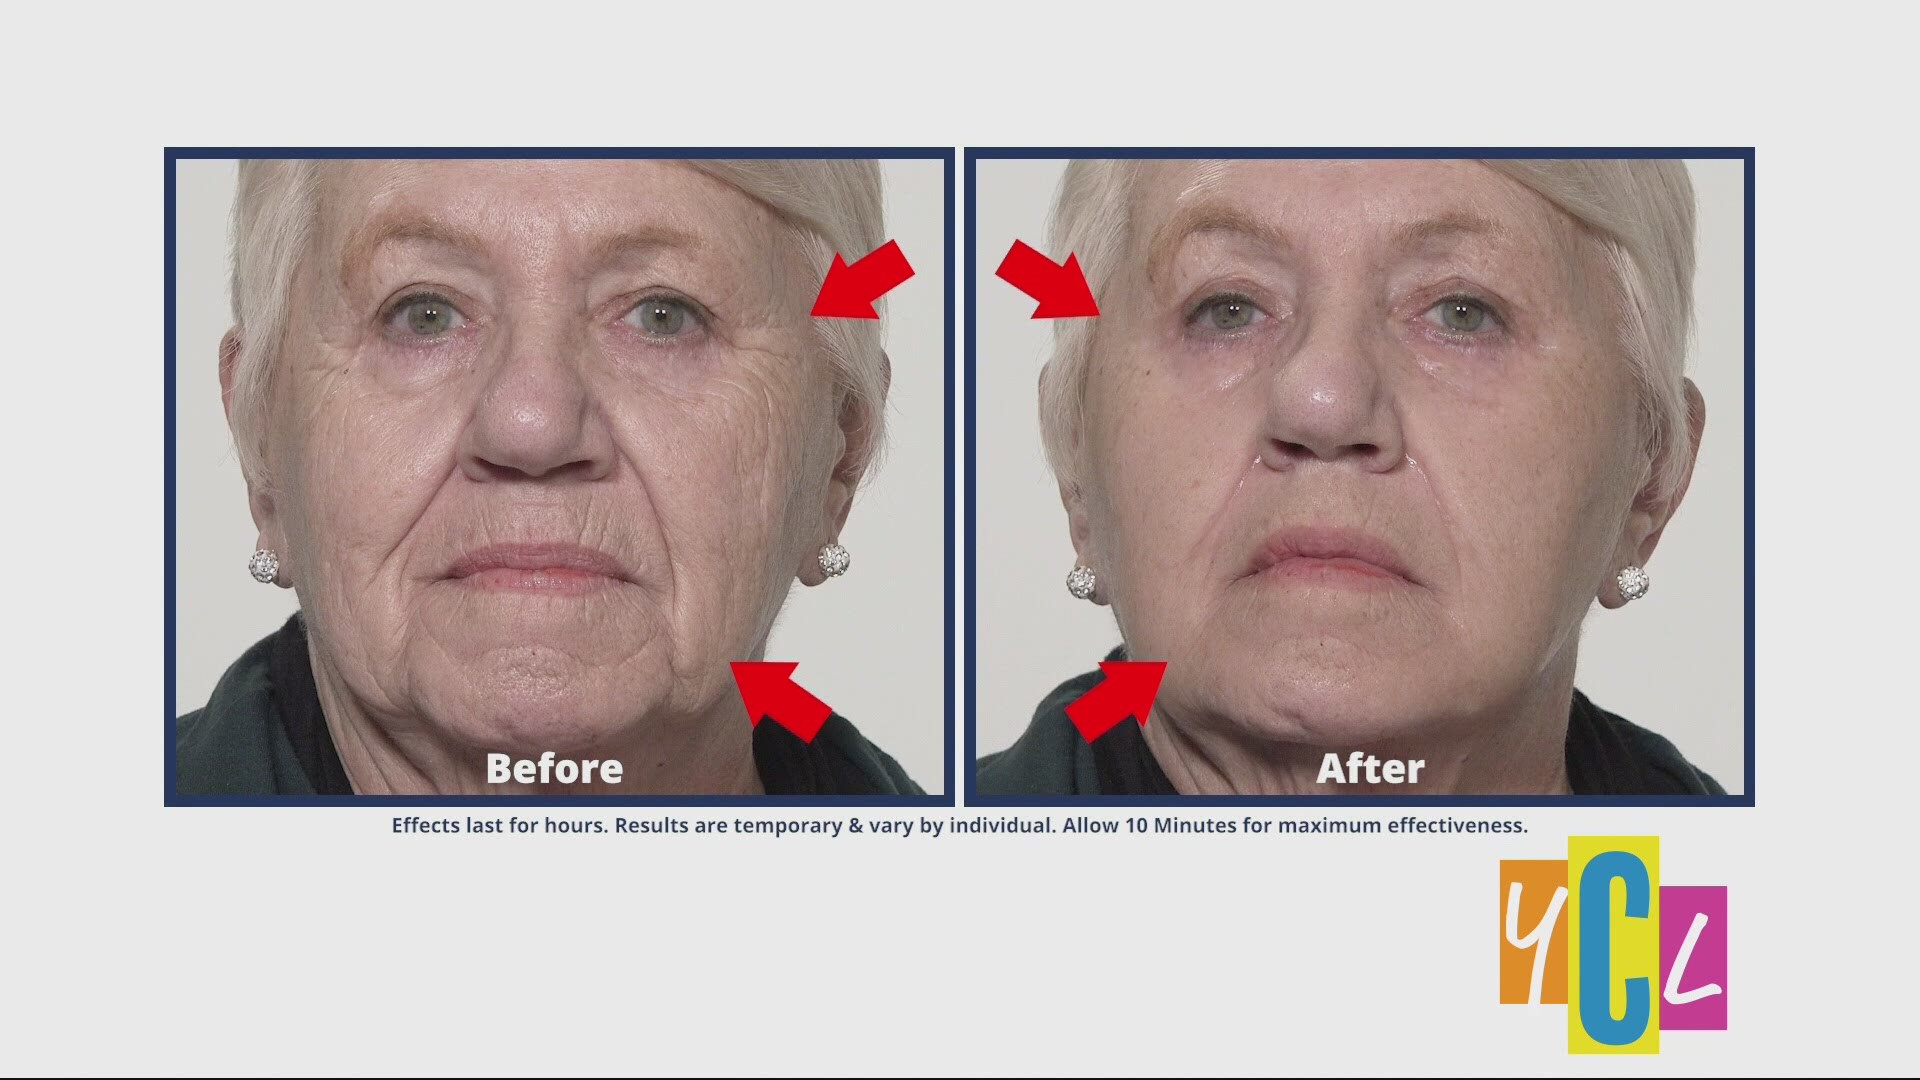 Plexaderm can give you younger looking skin in just minutes. This segment was paid for by True Earth Health Solutions.